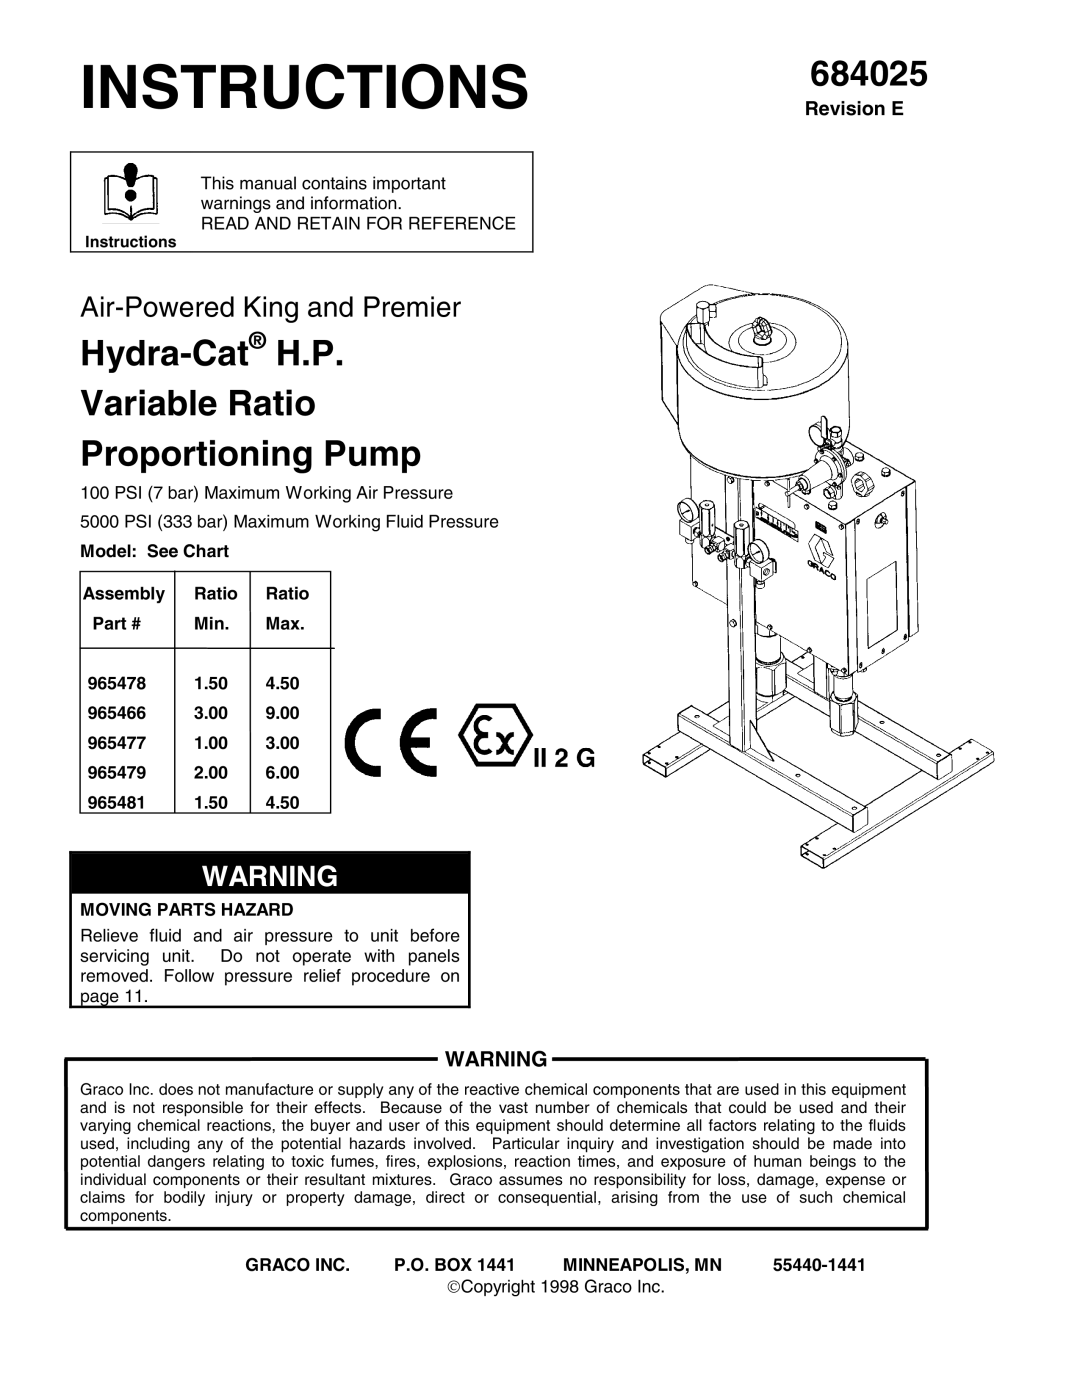 Graco 965478 manual 684025, Hydra-Cat H.P Variable Ratio Proportioning Pump, Revision E, Instructions, Model See Chart 